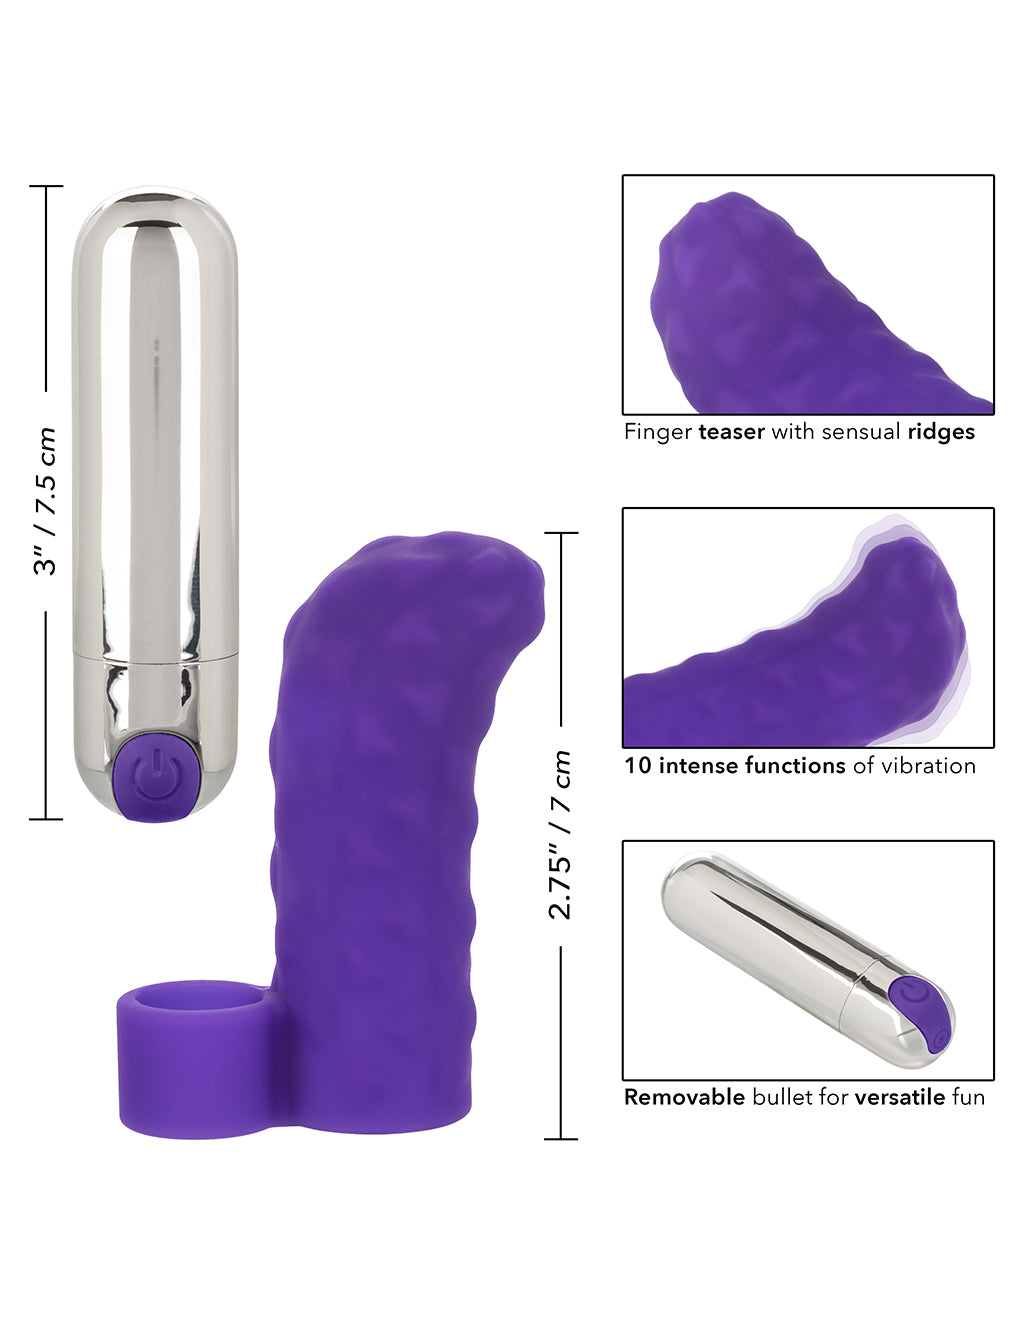 Intimate Play Rechargeable Finger Tease- size details